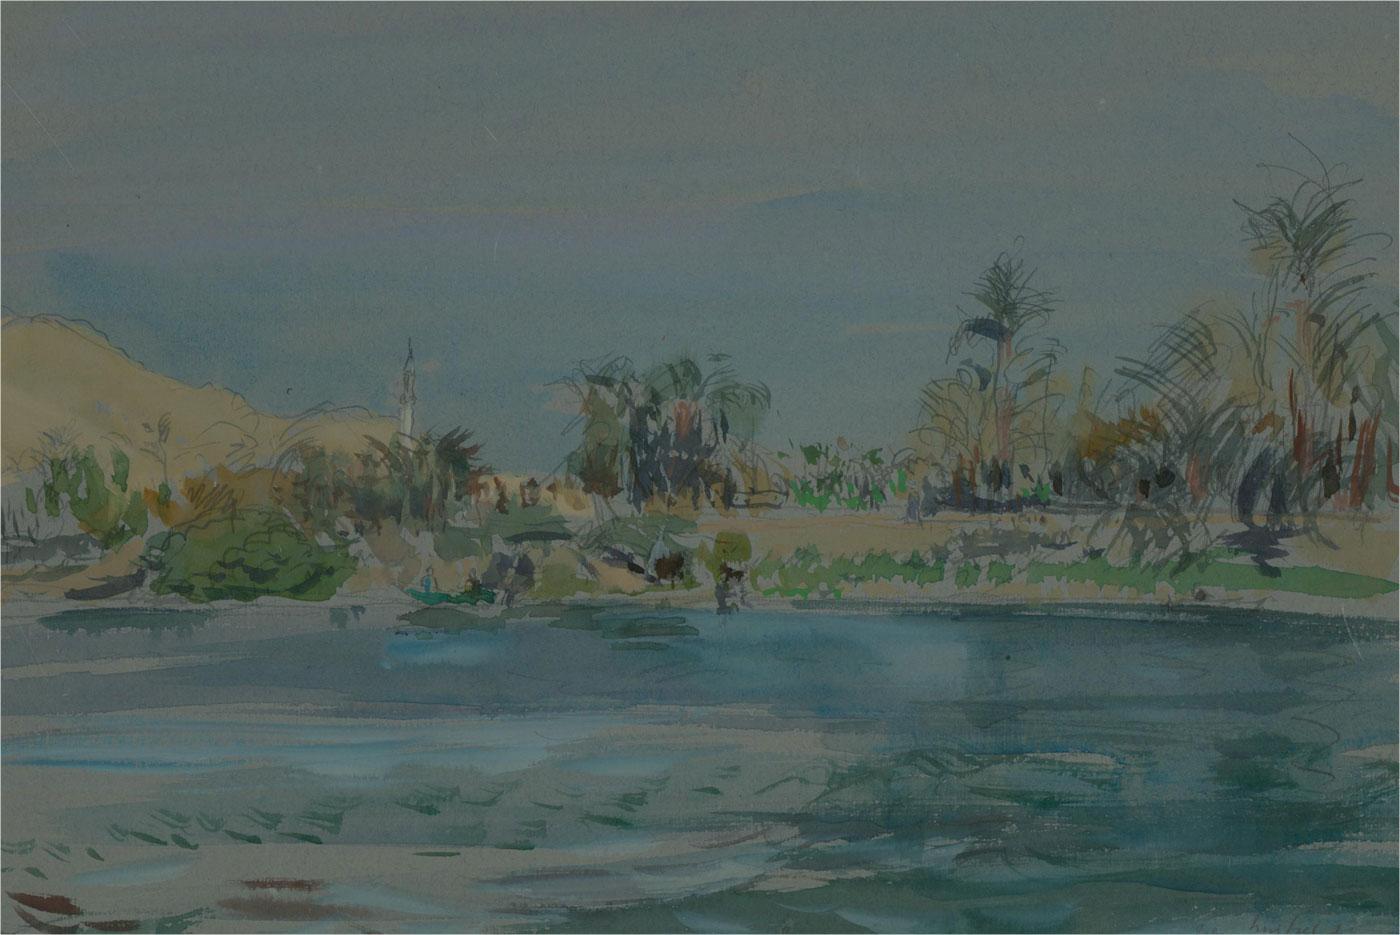 A gestural mid Century landscape showing a stretch of the Nile running through an Egyptian palm grove, visible on the distant bank. The artist has signed to the lower right and the painting has been presented in a brushed silver frame with layered